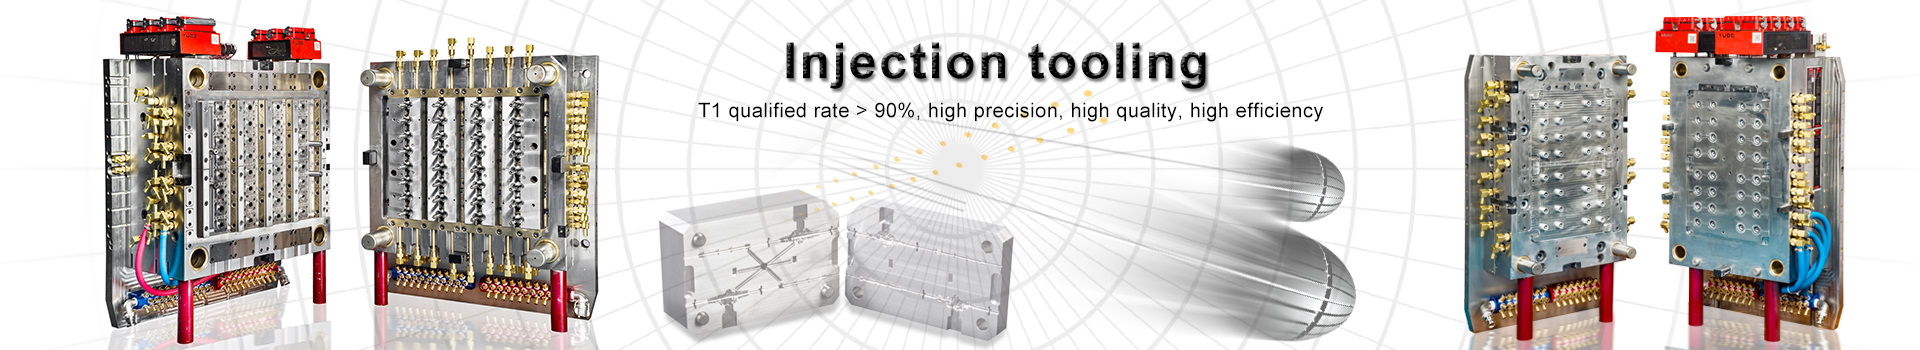 Injection tooling|Injection tooling services